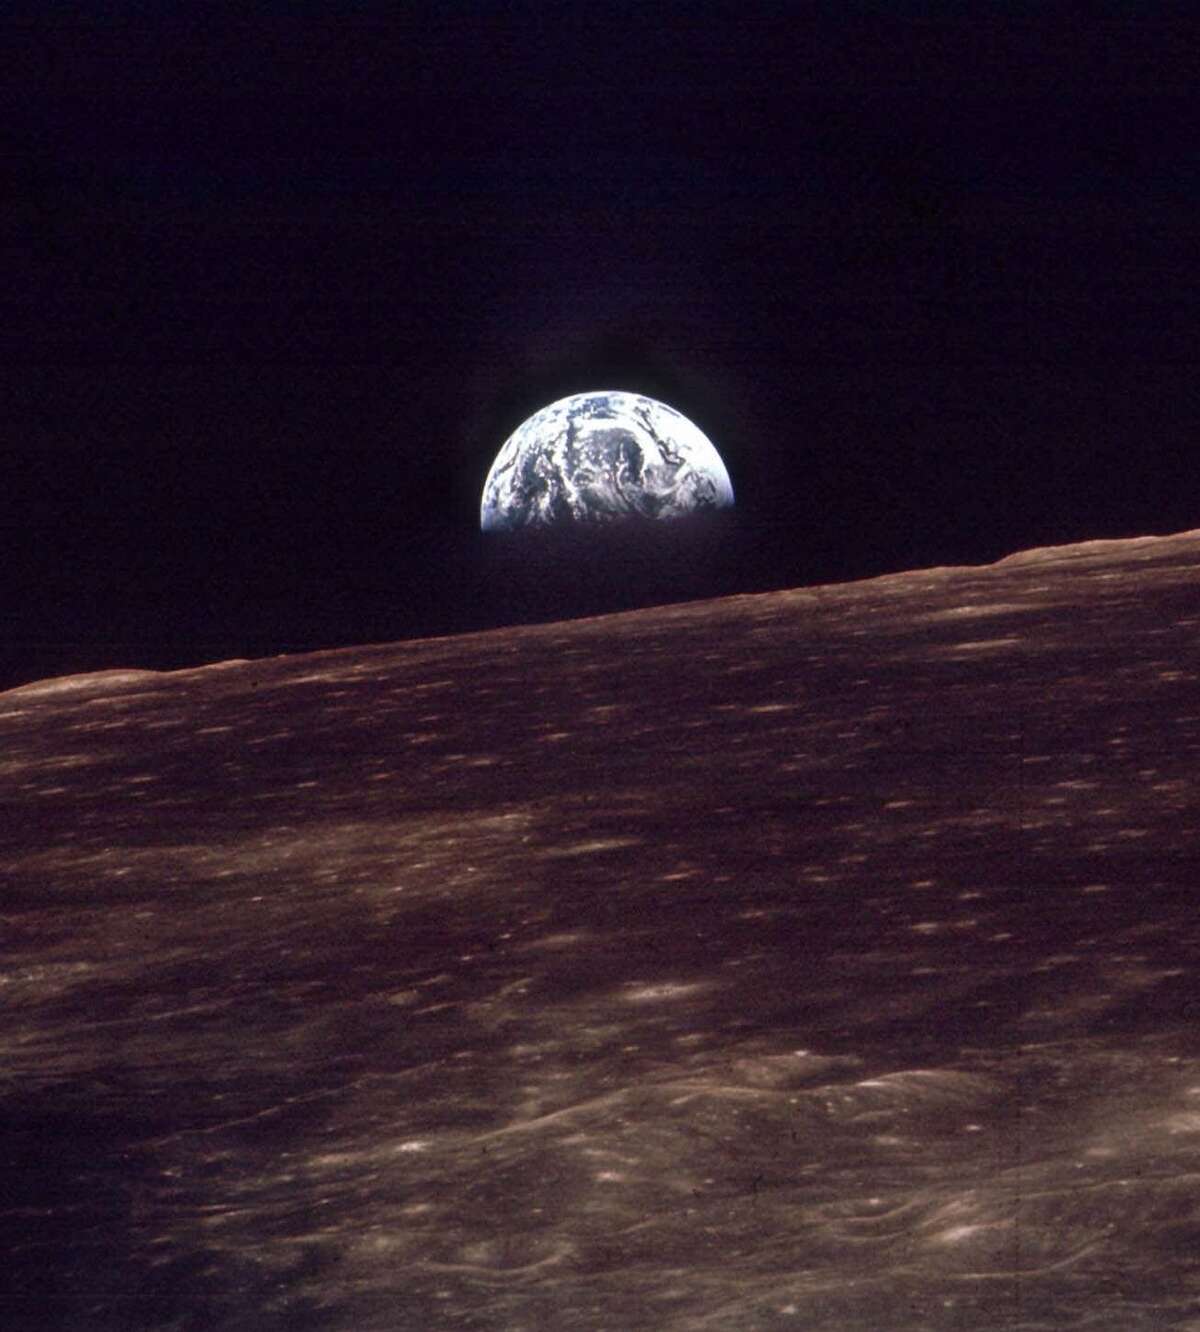 The earth rises over the horizon of the moon in this Dec. 24, 1968 file photo made by the astronauts on Apollo 8. (AP Photo/NASA)